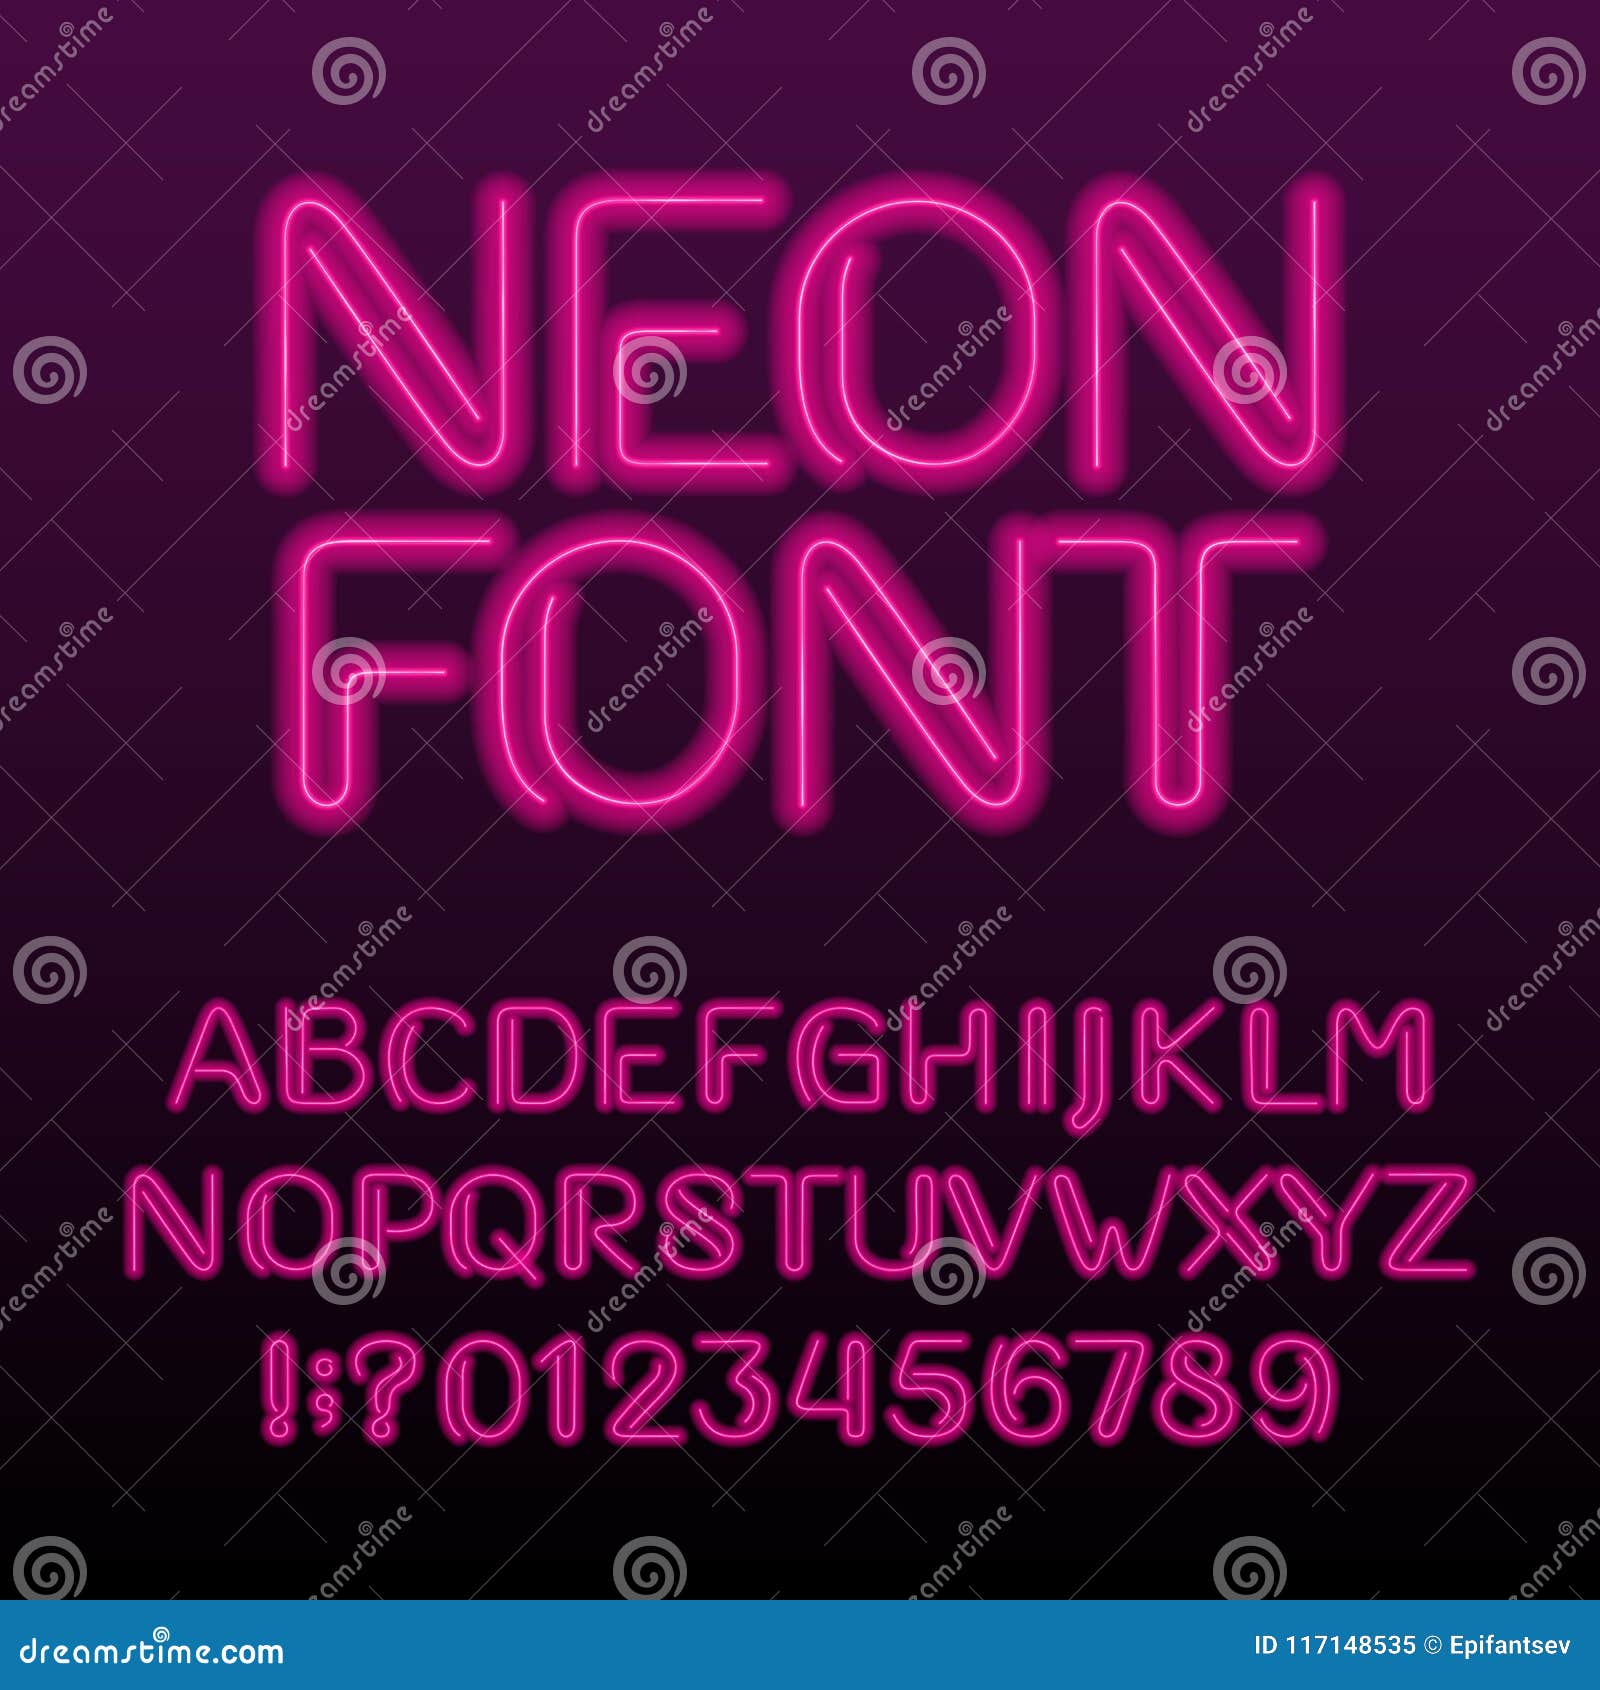 Neon Light Alphabet Font. Neon Color Letters and Numbers. Stock Vector ...